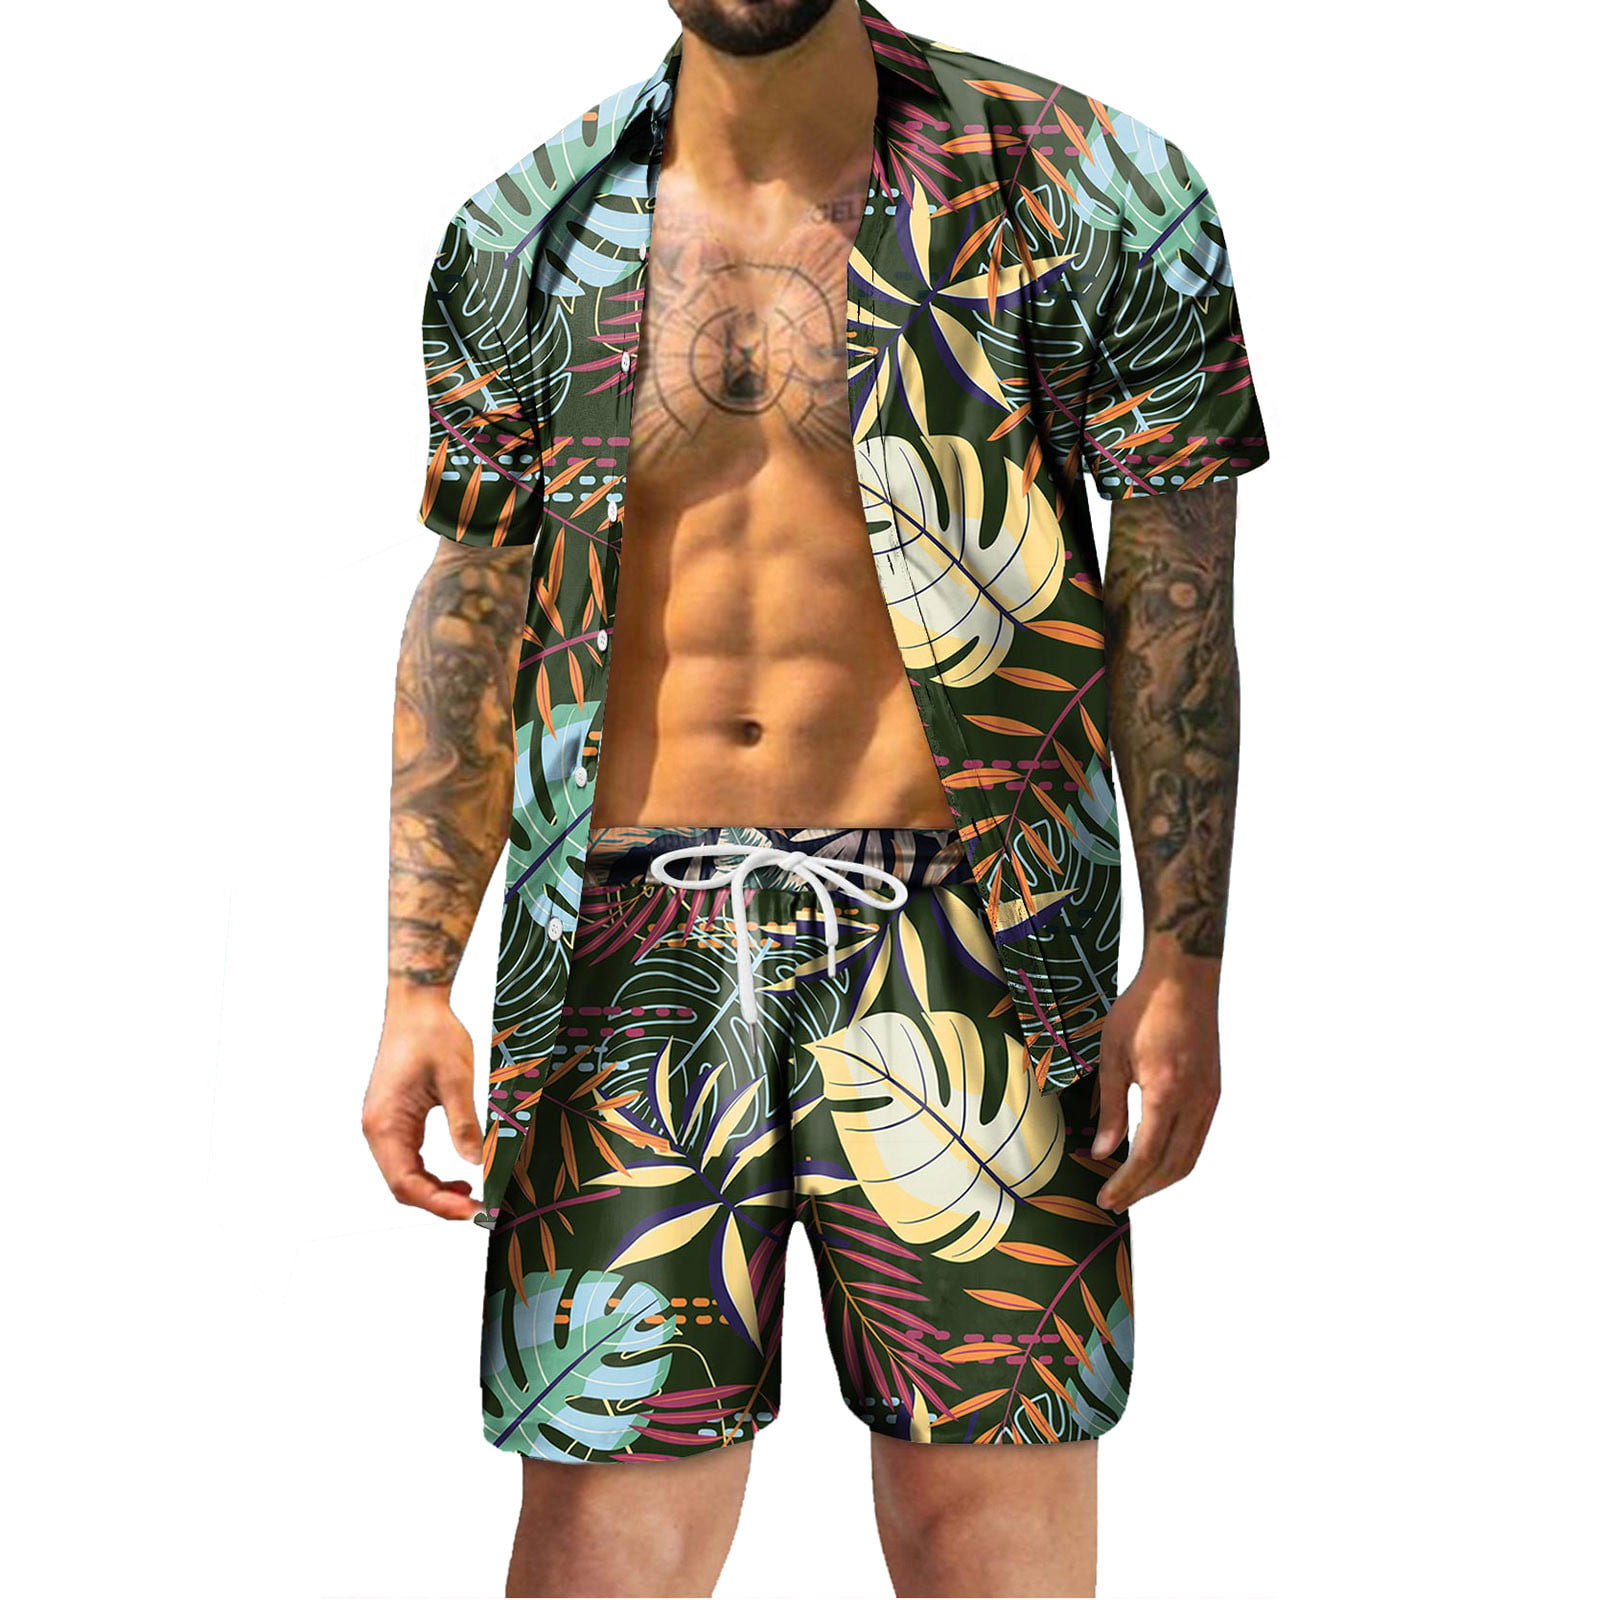  HNKDD Beach Wear Clothes Men Shirt Set Sea Side Vocation  Clothing Loose 2 Piece Set Outfits (Color : D, Size : M code) : Clothing,  Shoes & Jewelry